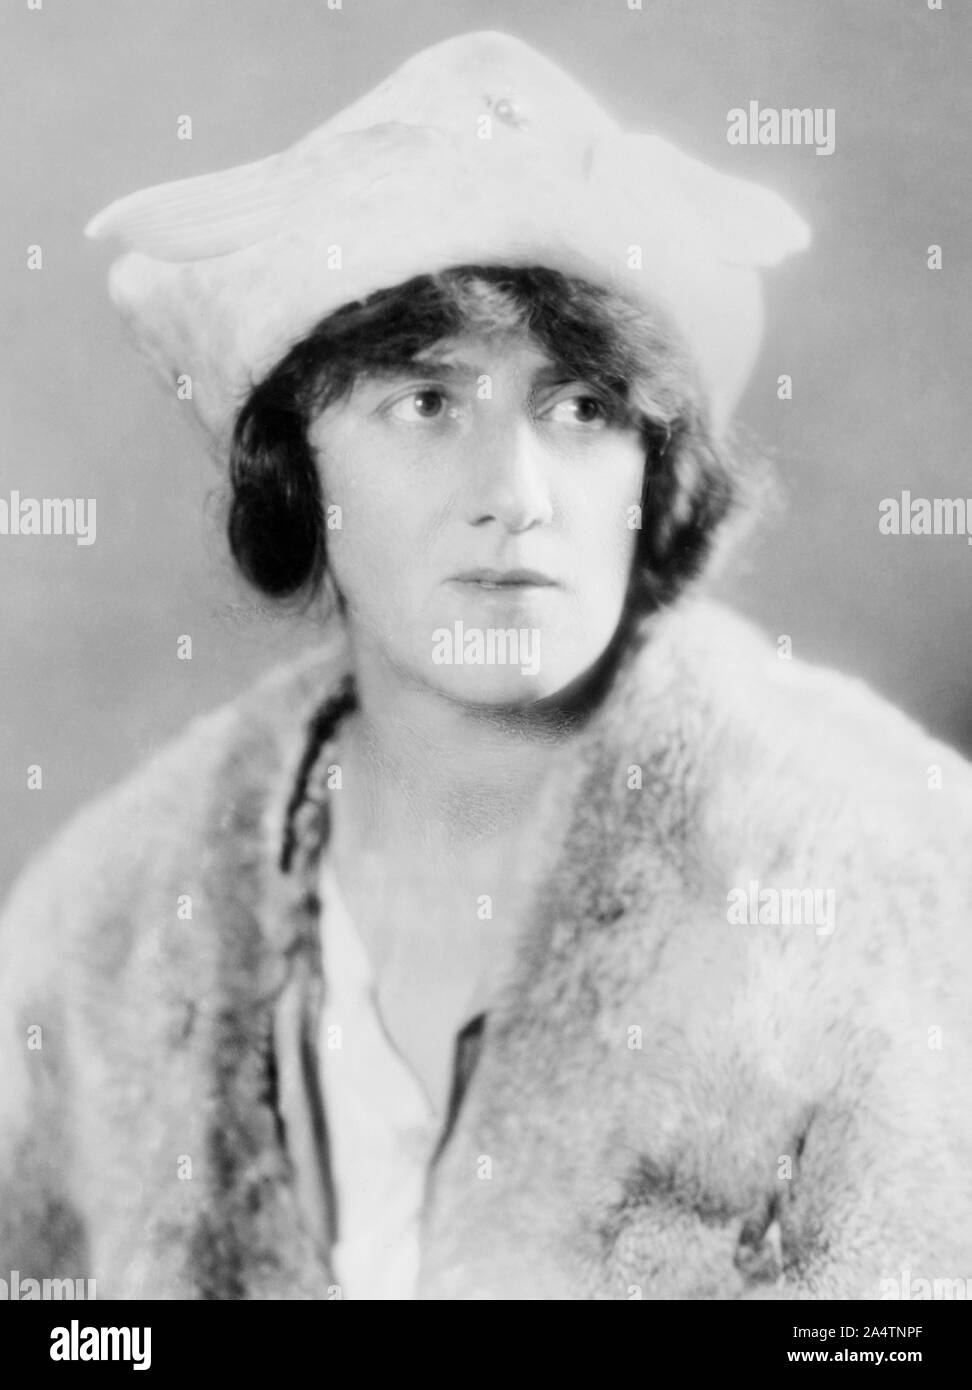 Vintage portrait photo of British author, palaeobotanist, women’s rights campaigner and birth control / family planning pioneer Marie Stopes (1880 – 1958). Photo circa 1921 by Underwood & Underwood. Stock Photo